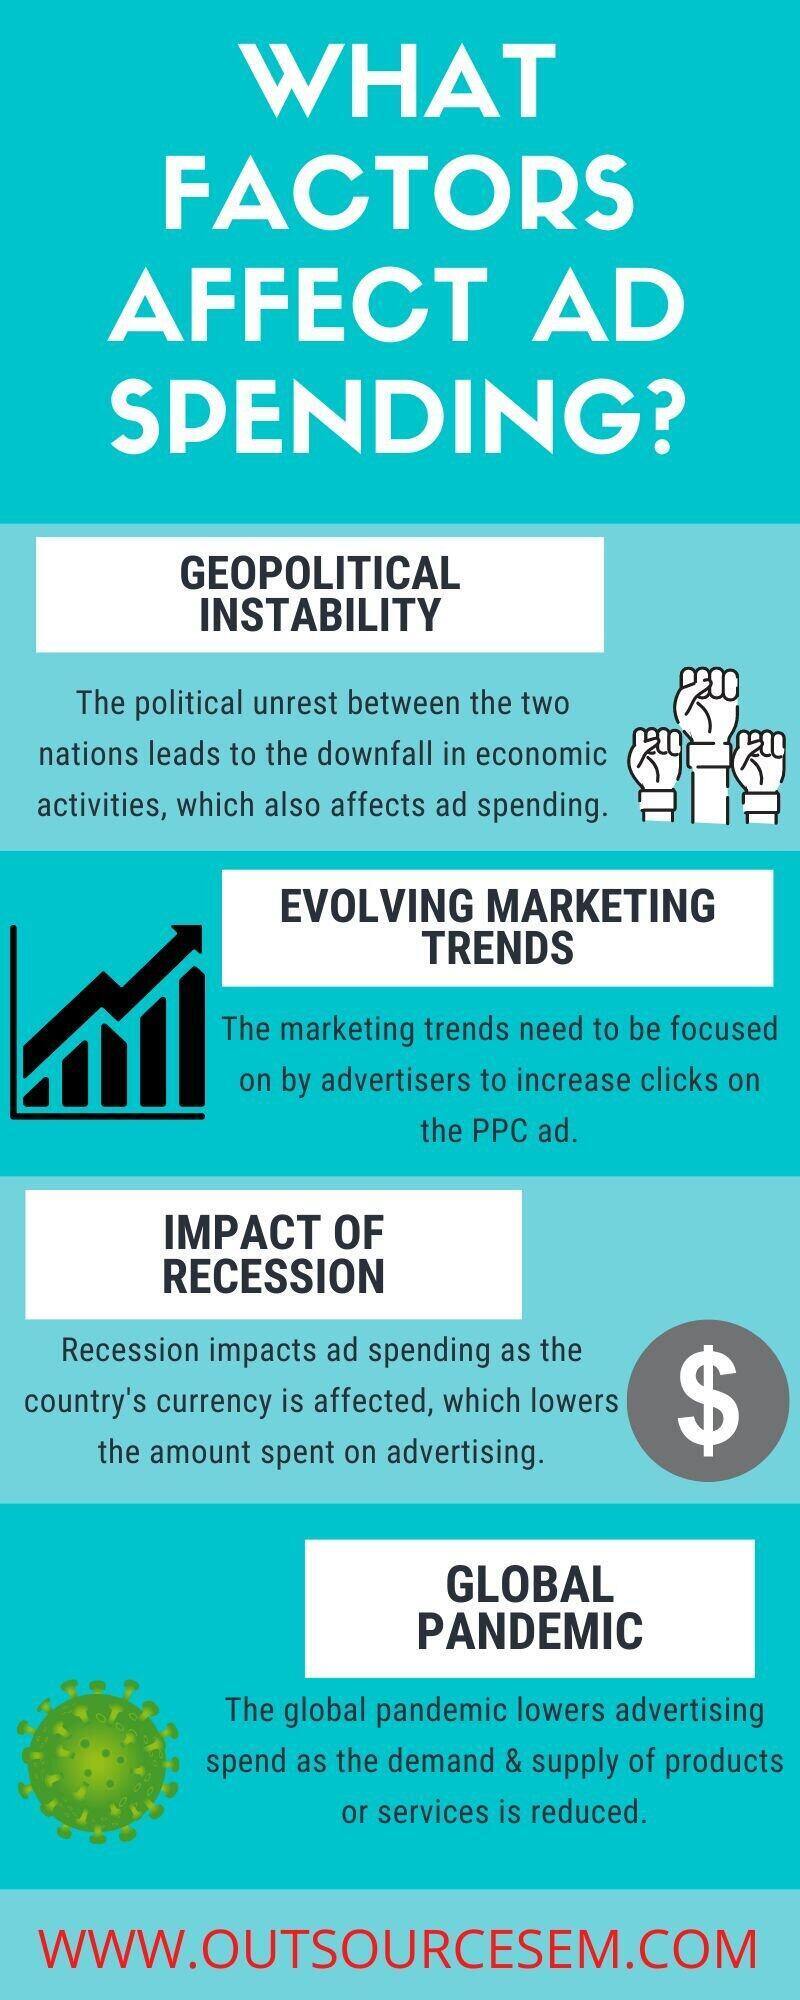 What-factors-affect-ad-spending-infographic